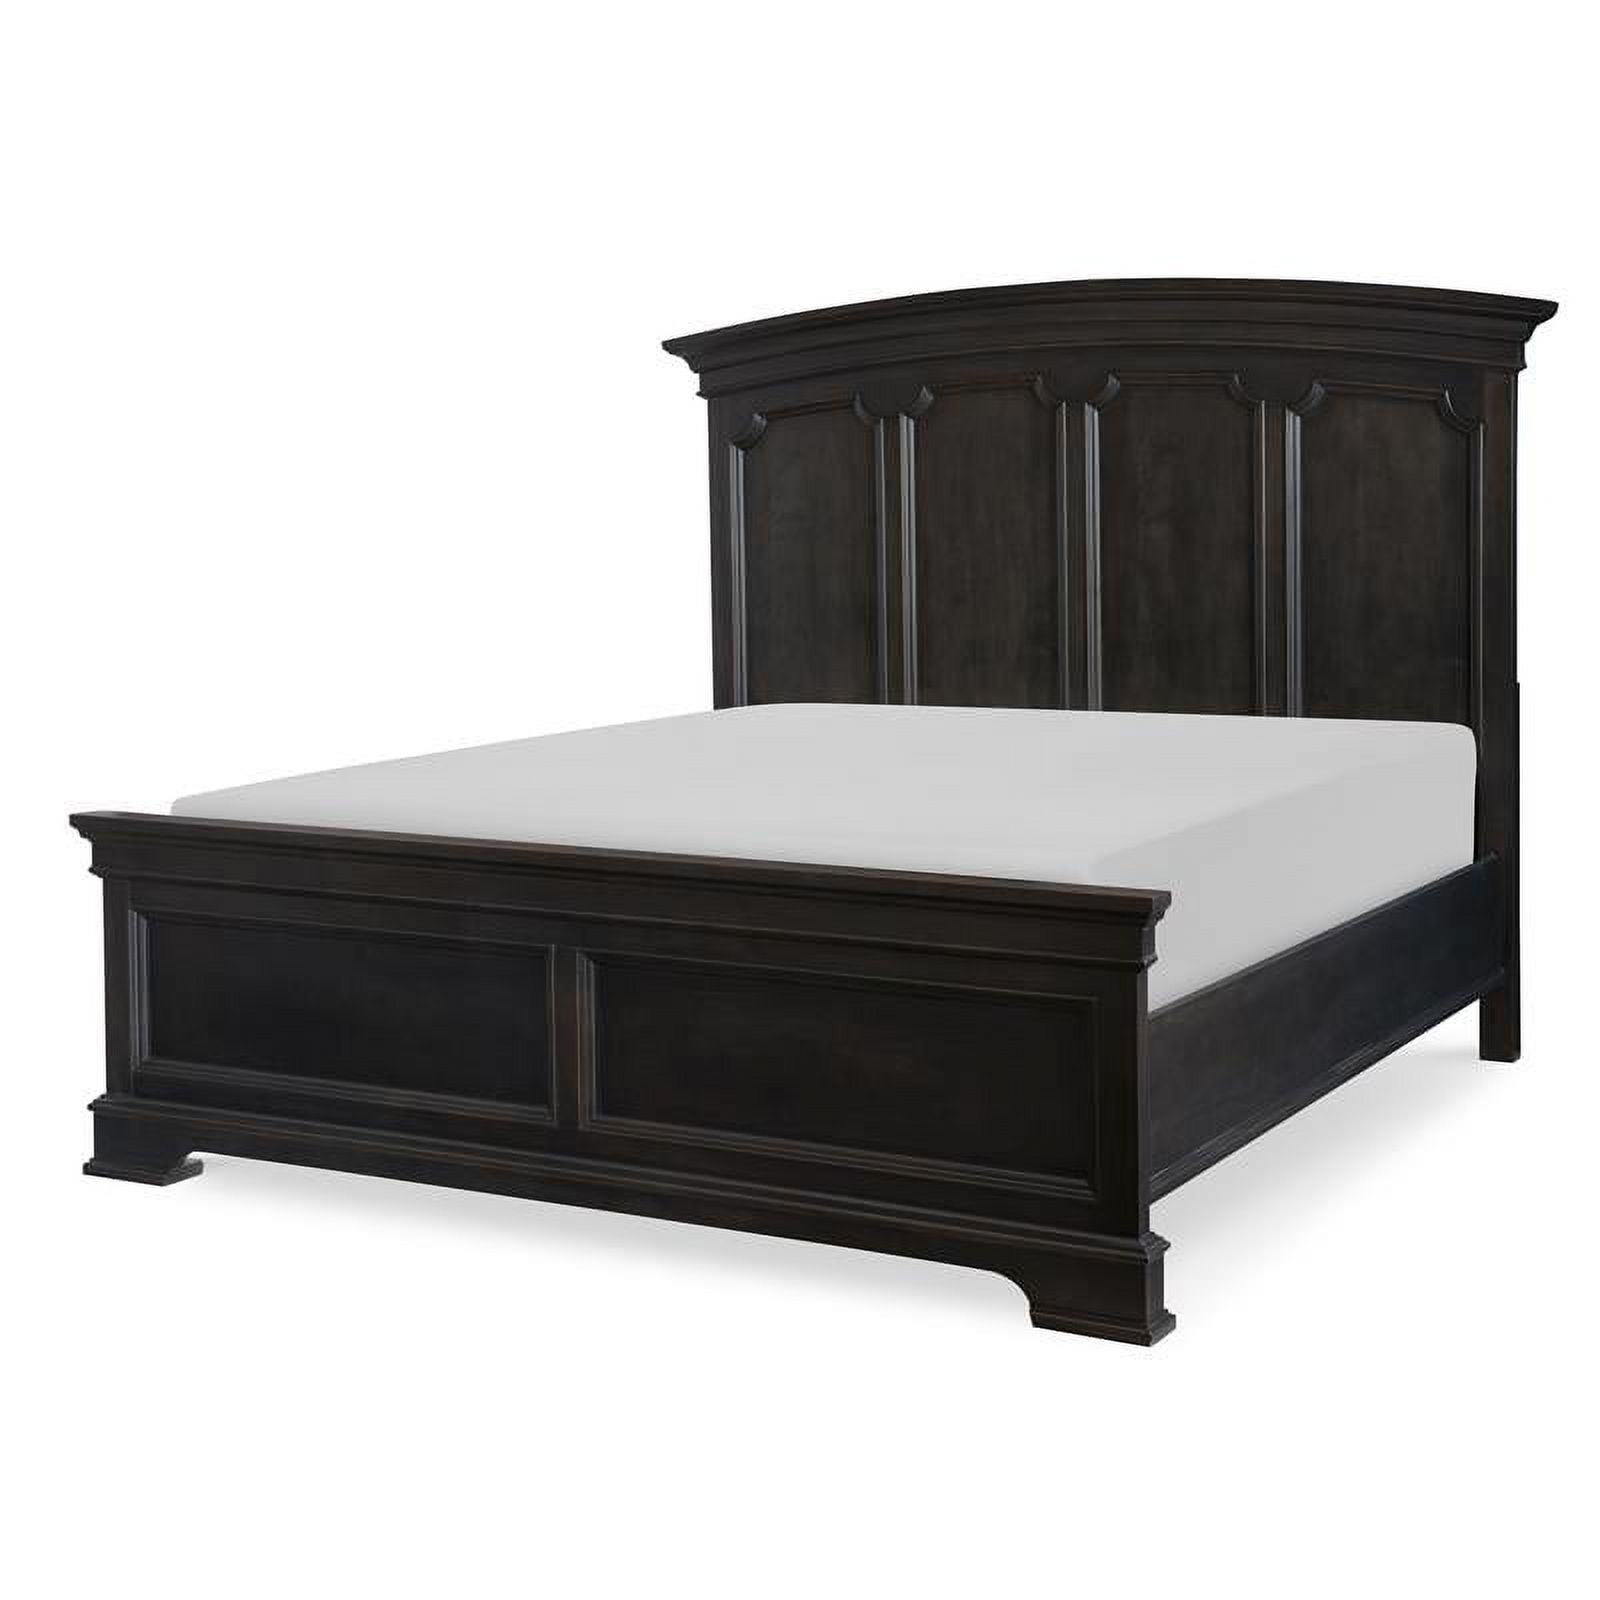 Townsend King / California King Wood Sepia Charcoal Arched Panel Headboard - image 1 of 5